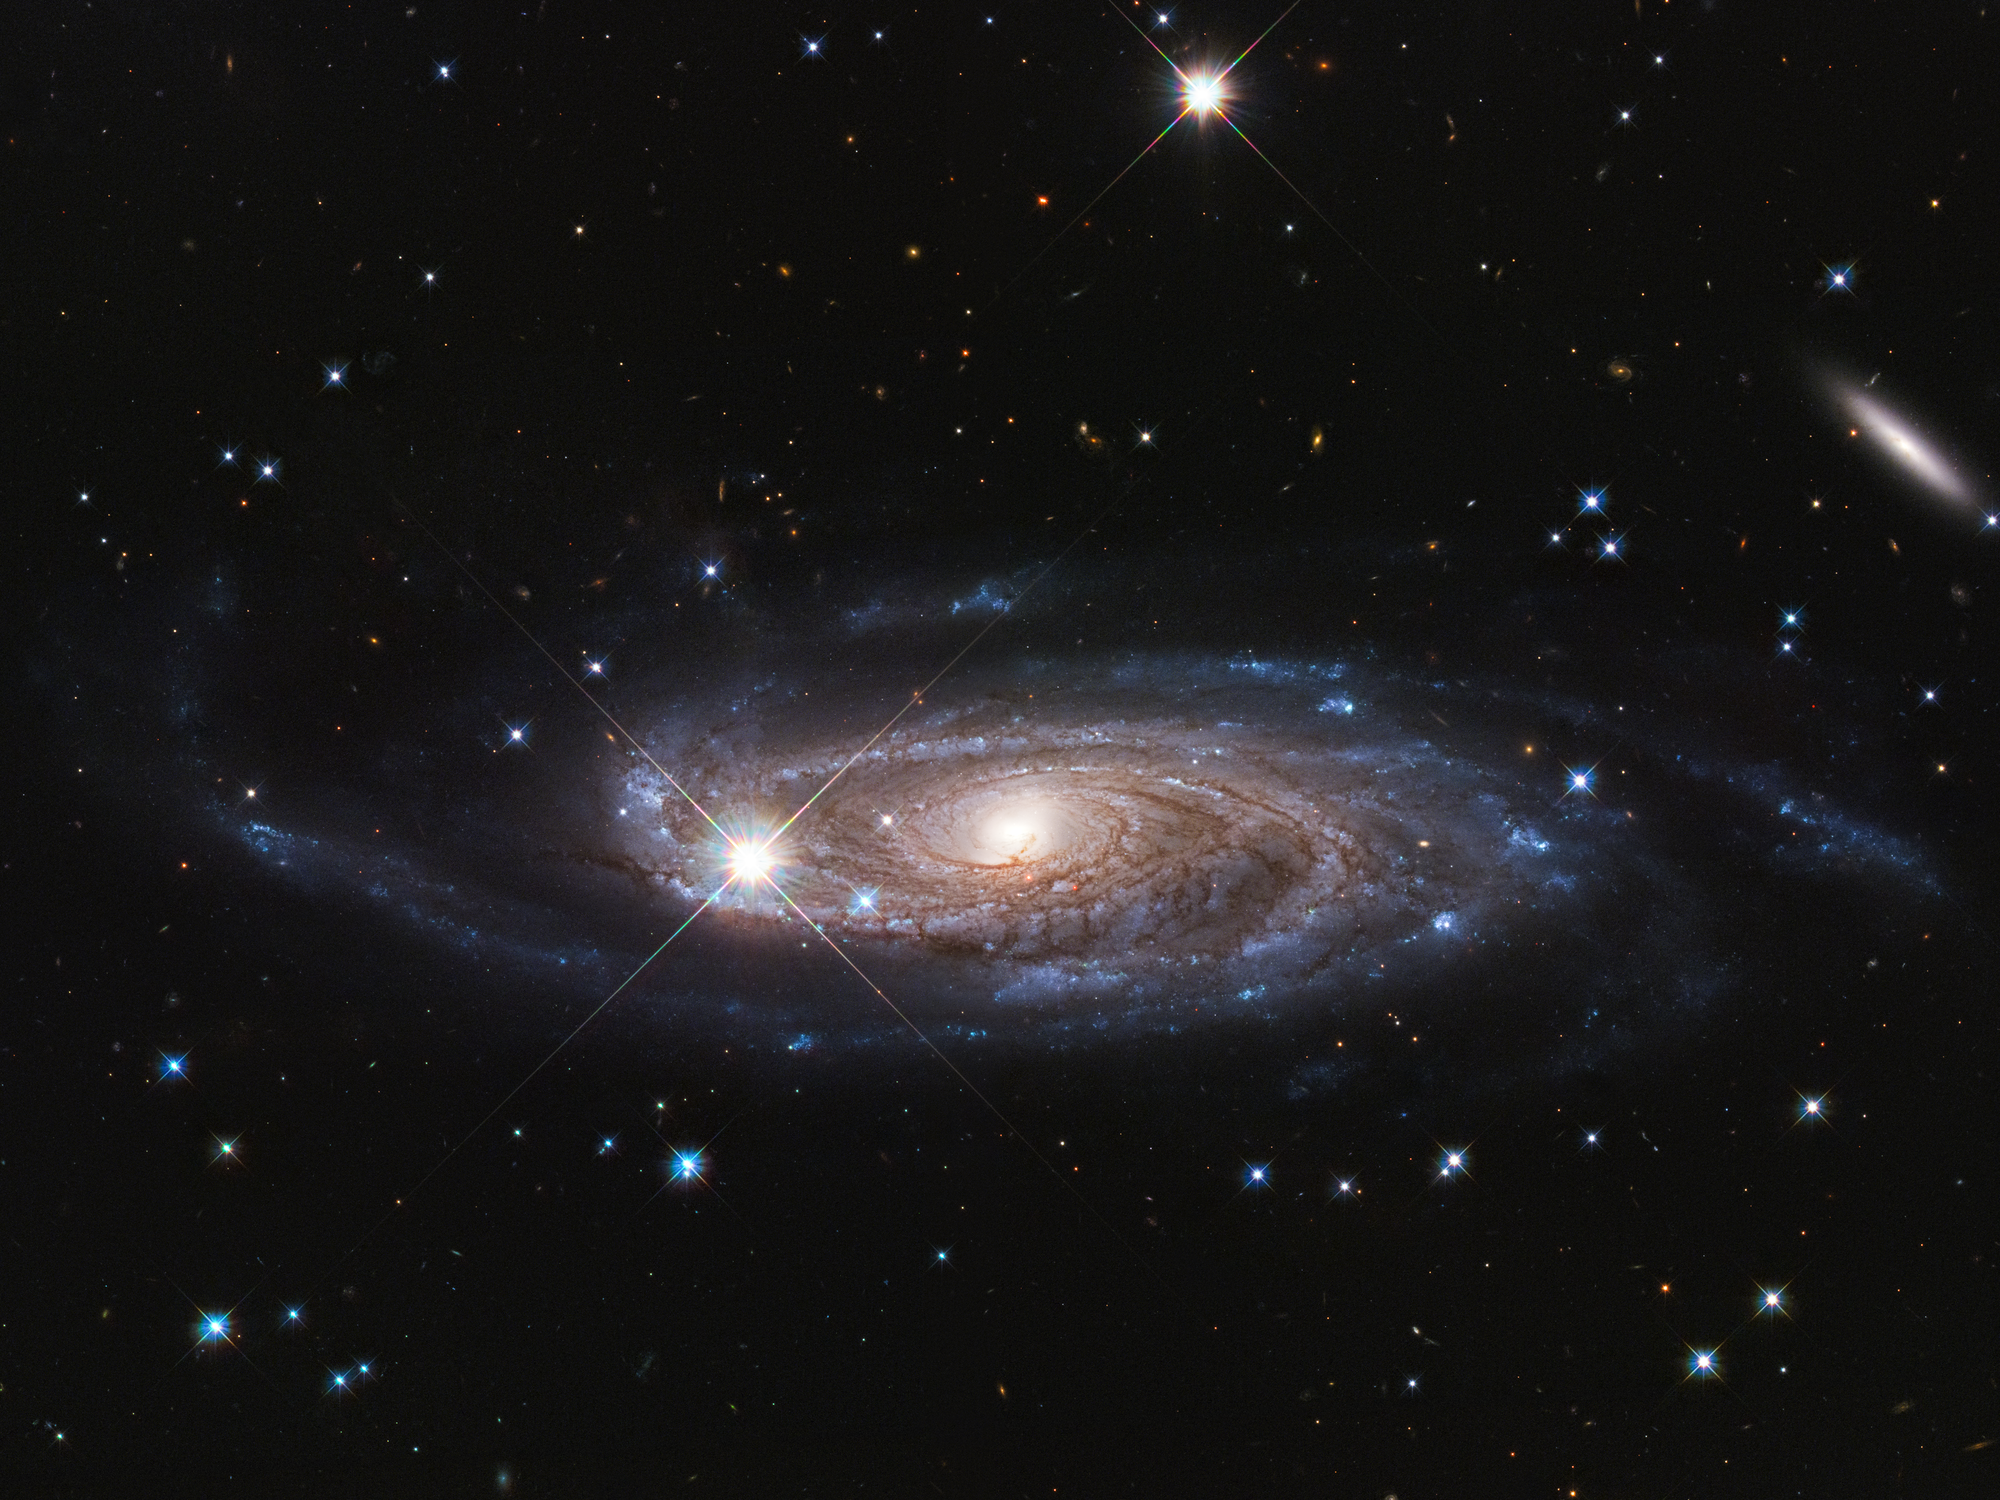 Huge spiral galaxy UGC 2885, located 232 million light-years away in the northern constellation, Perseus.